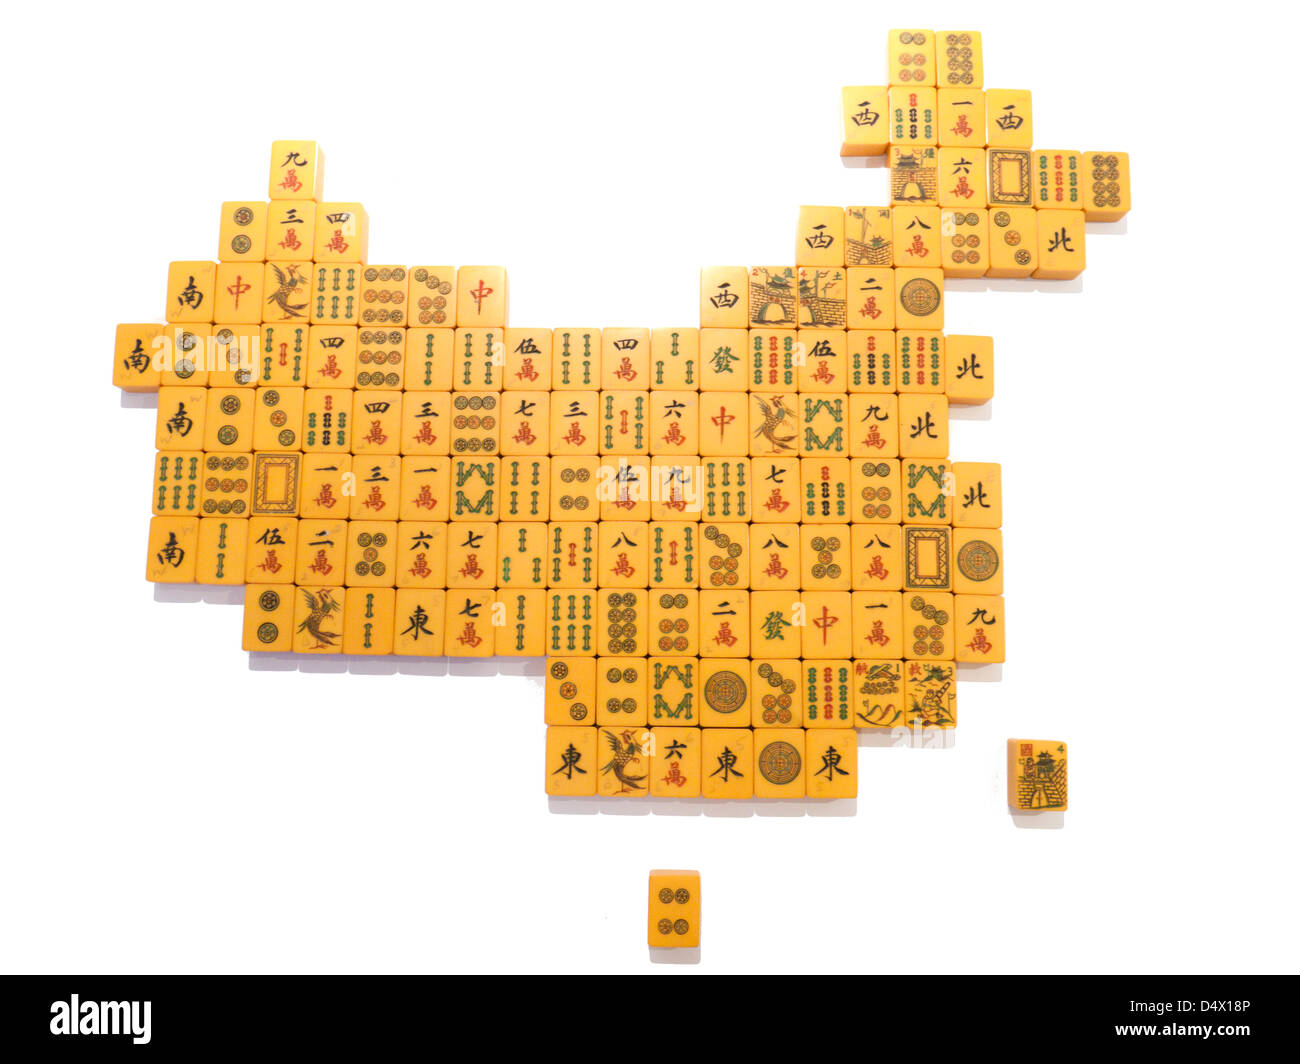 An approximate 3D representation map of China made of Mah Jong tiles overview Stock Photo